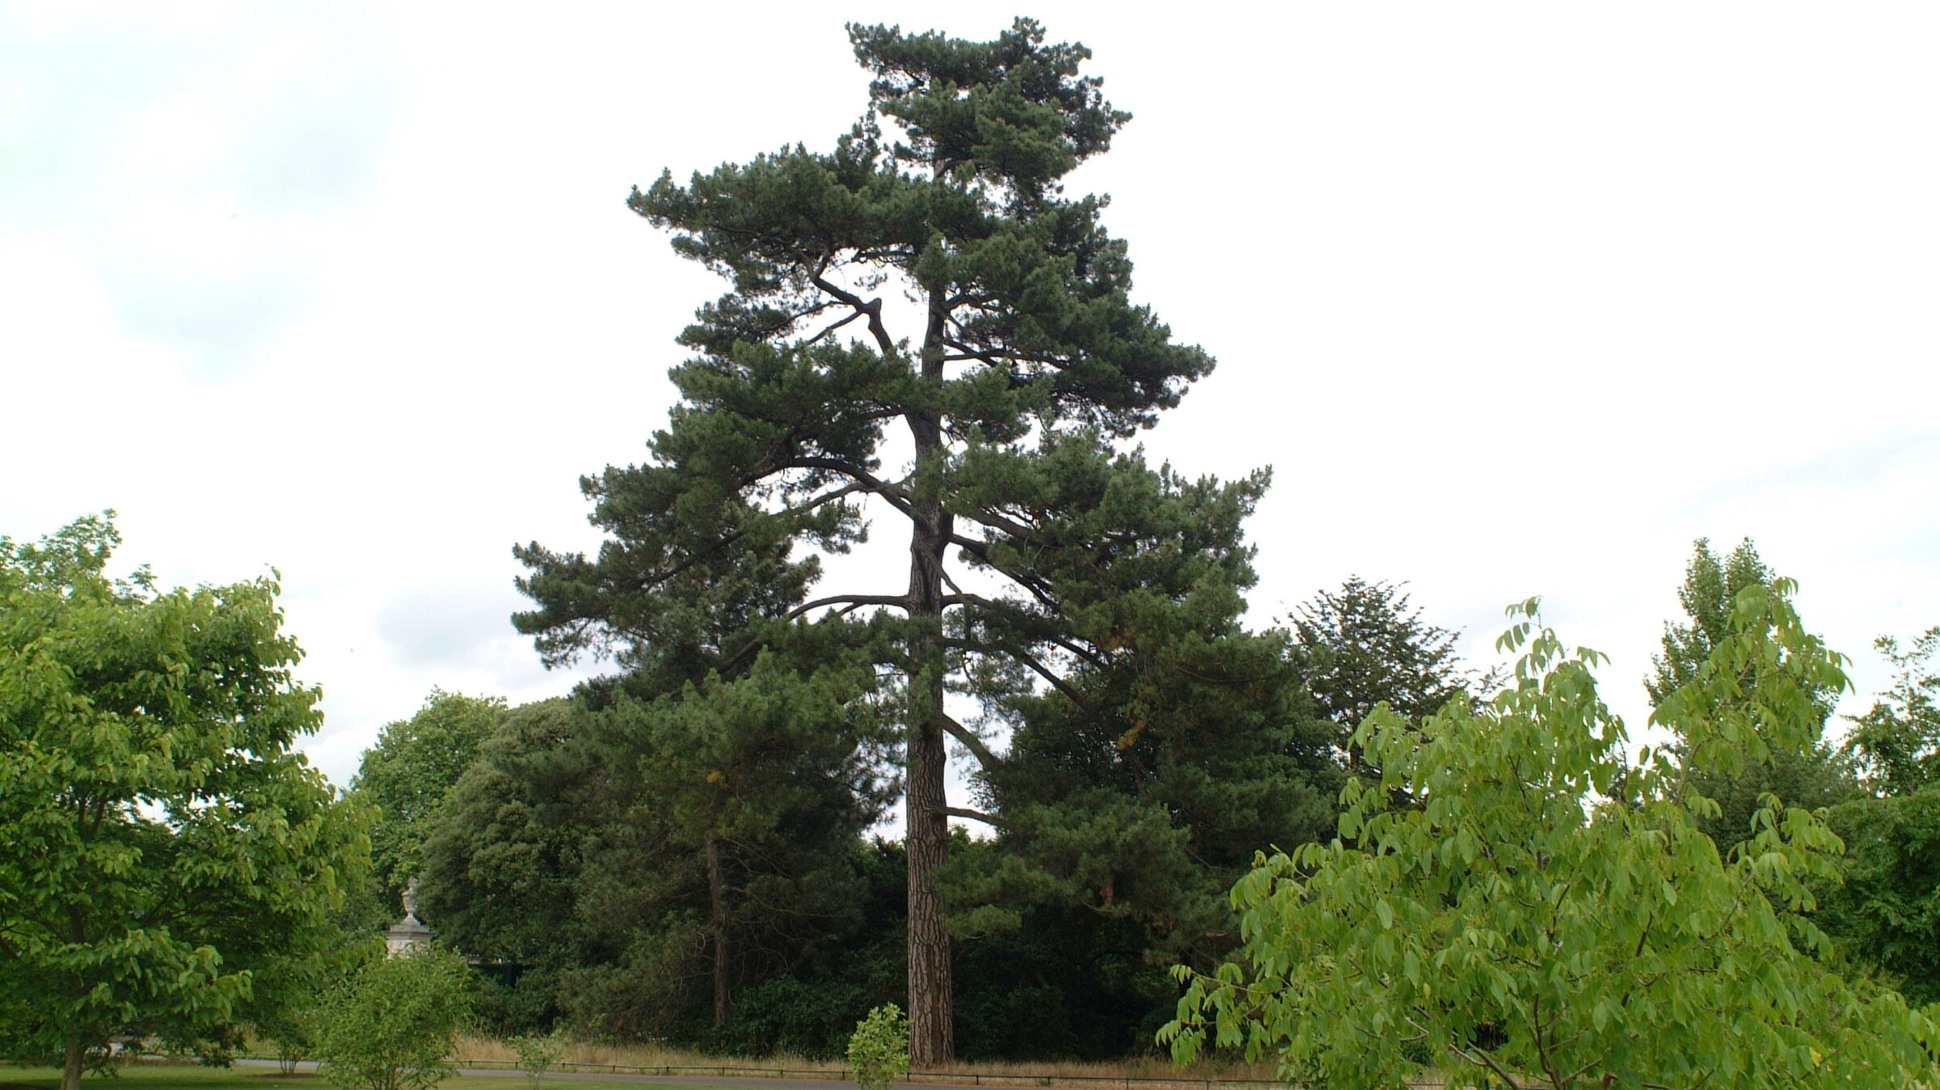 A tall pine tree in a group of trees in front of a white cloudy sky